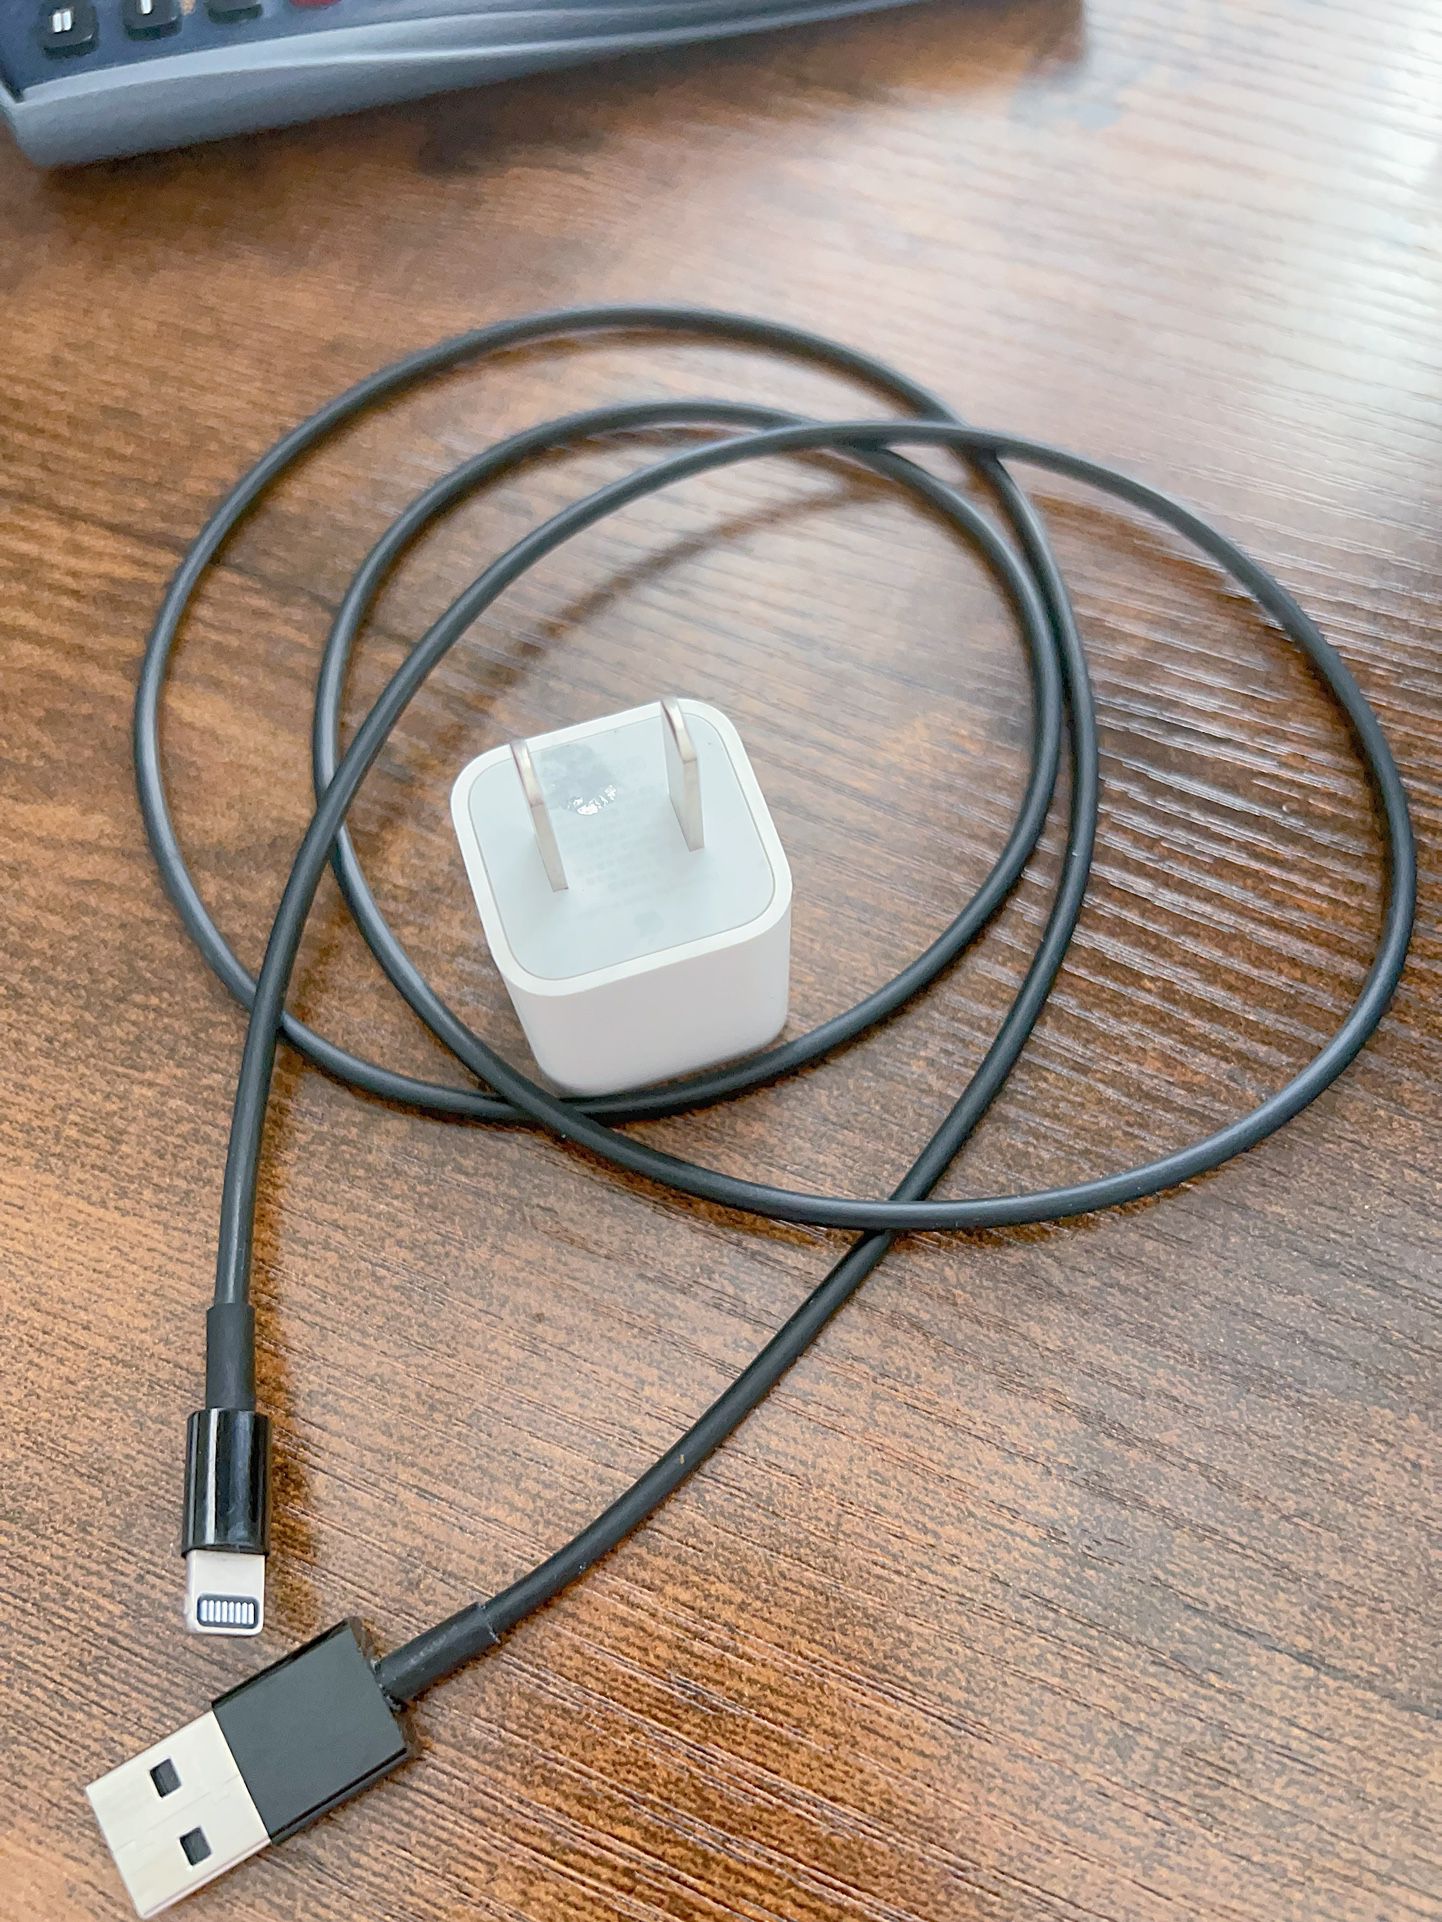 OEM Apple charger/wall blocks & cable Genius 